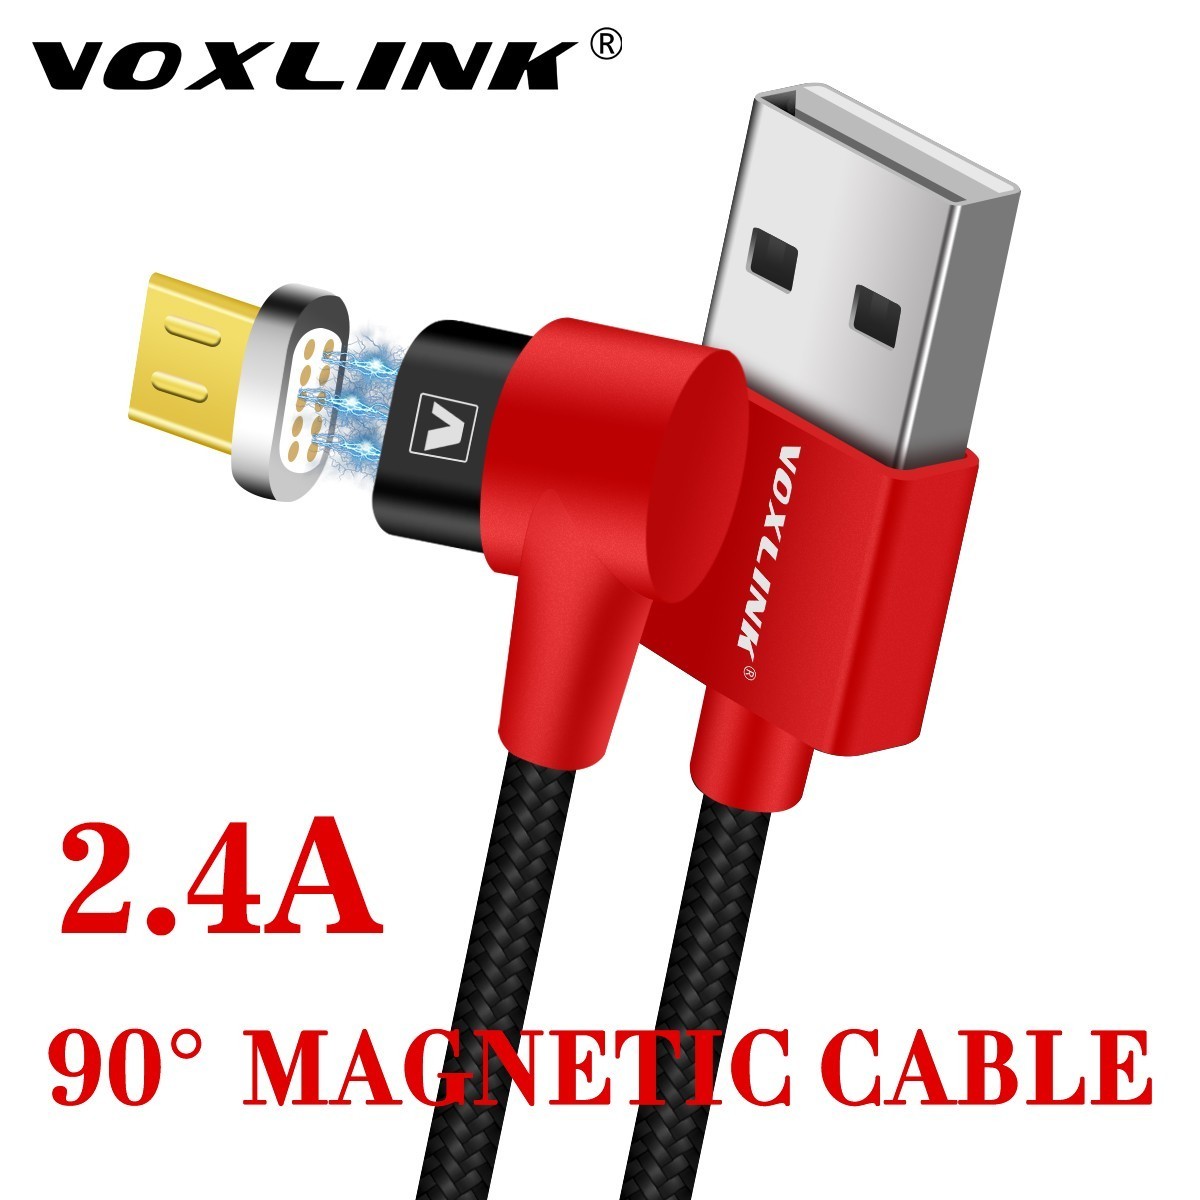 VOXLINK 90 Degree Magnetic Cable mirco usb Right Angle 2.4A Fast Charging Nylon USB Charger Cable for Huawei xiaomi Samsung LG-red red